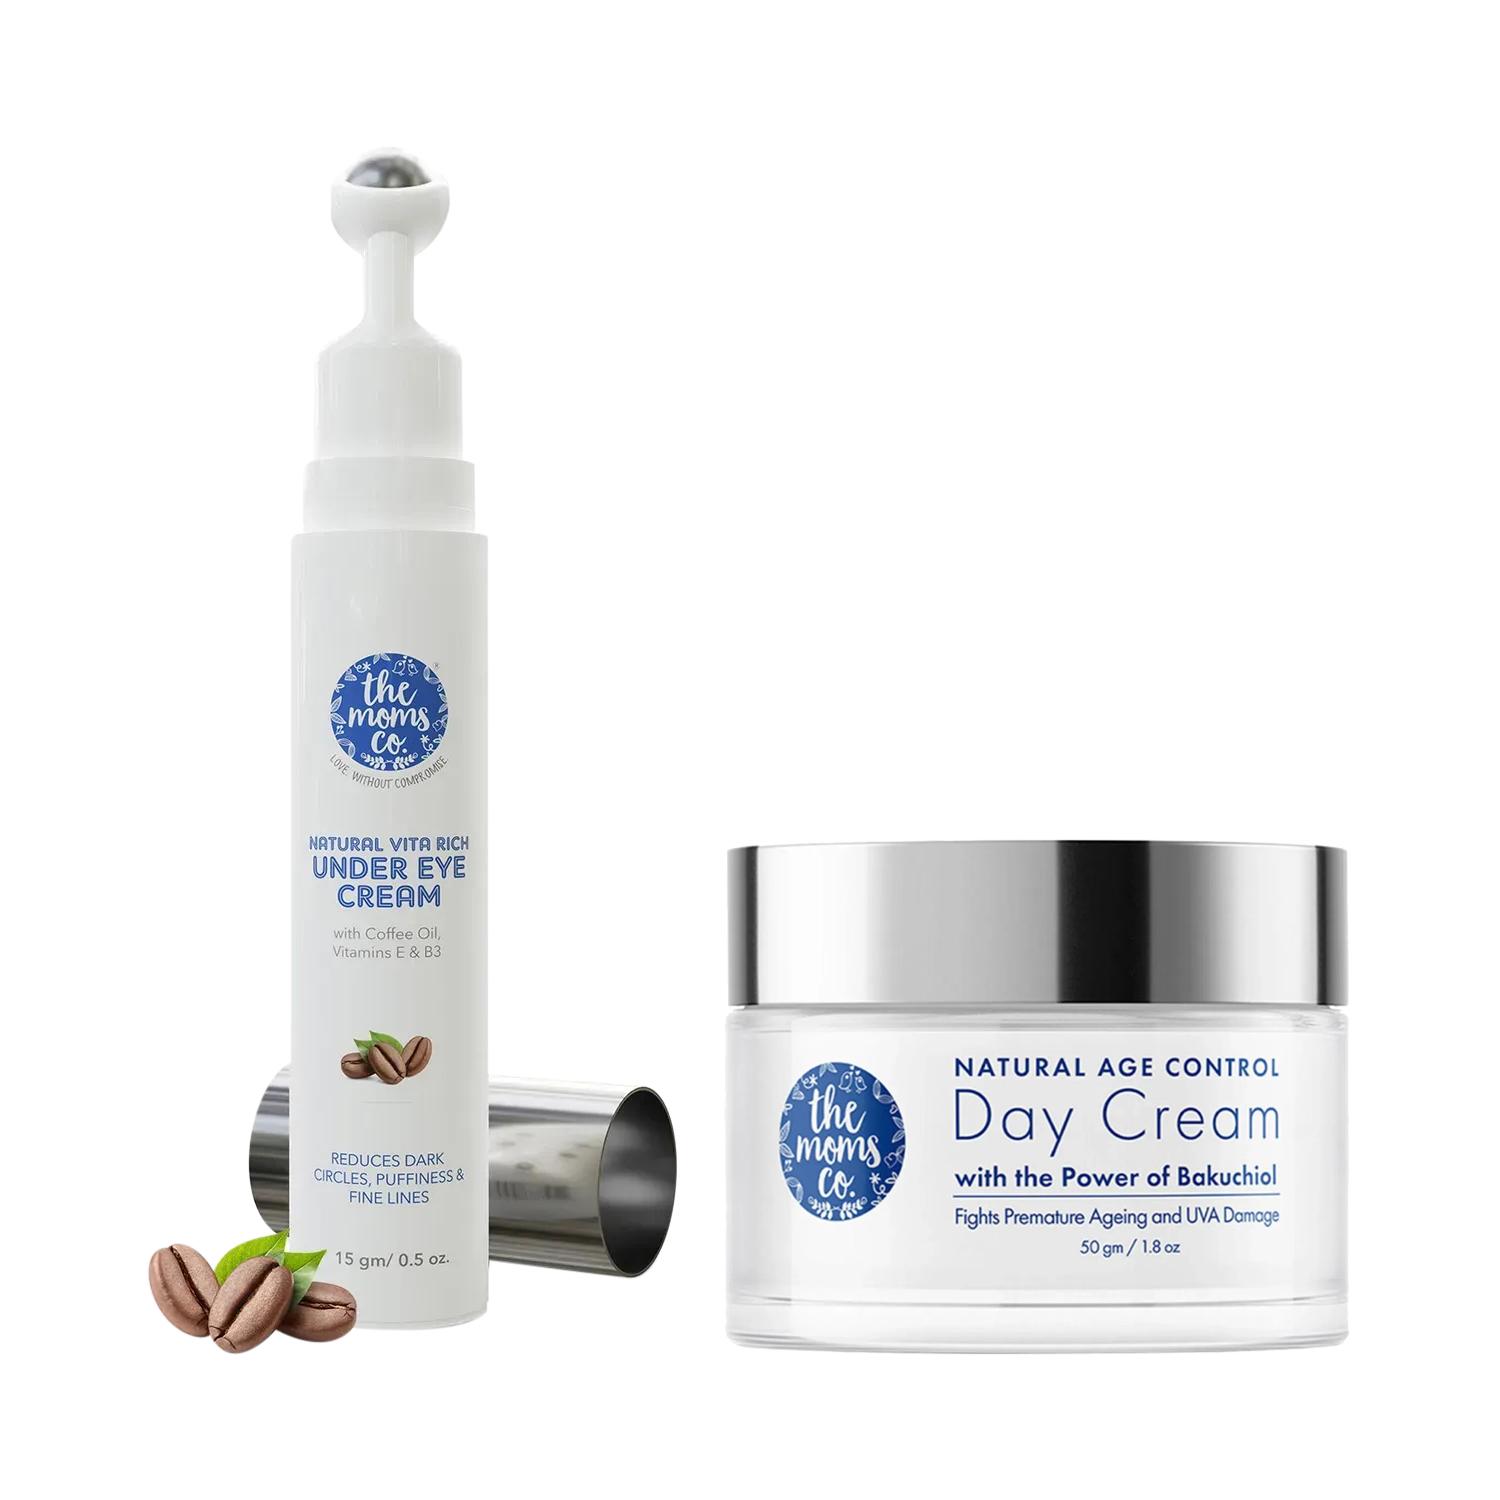 The Mom's Co. Vita Rich Under Eye Cream with Coffee Oil & Natural Age Control Day Cream (50g) Combo